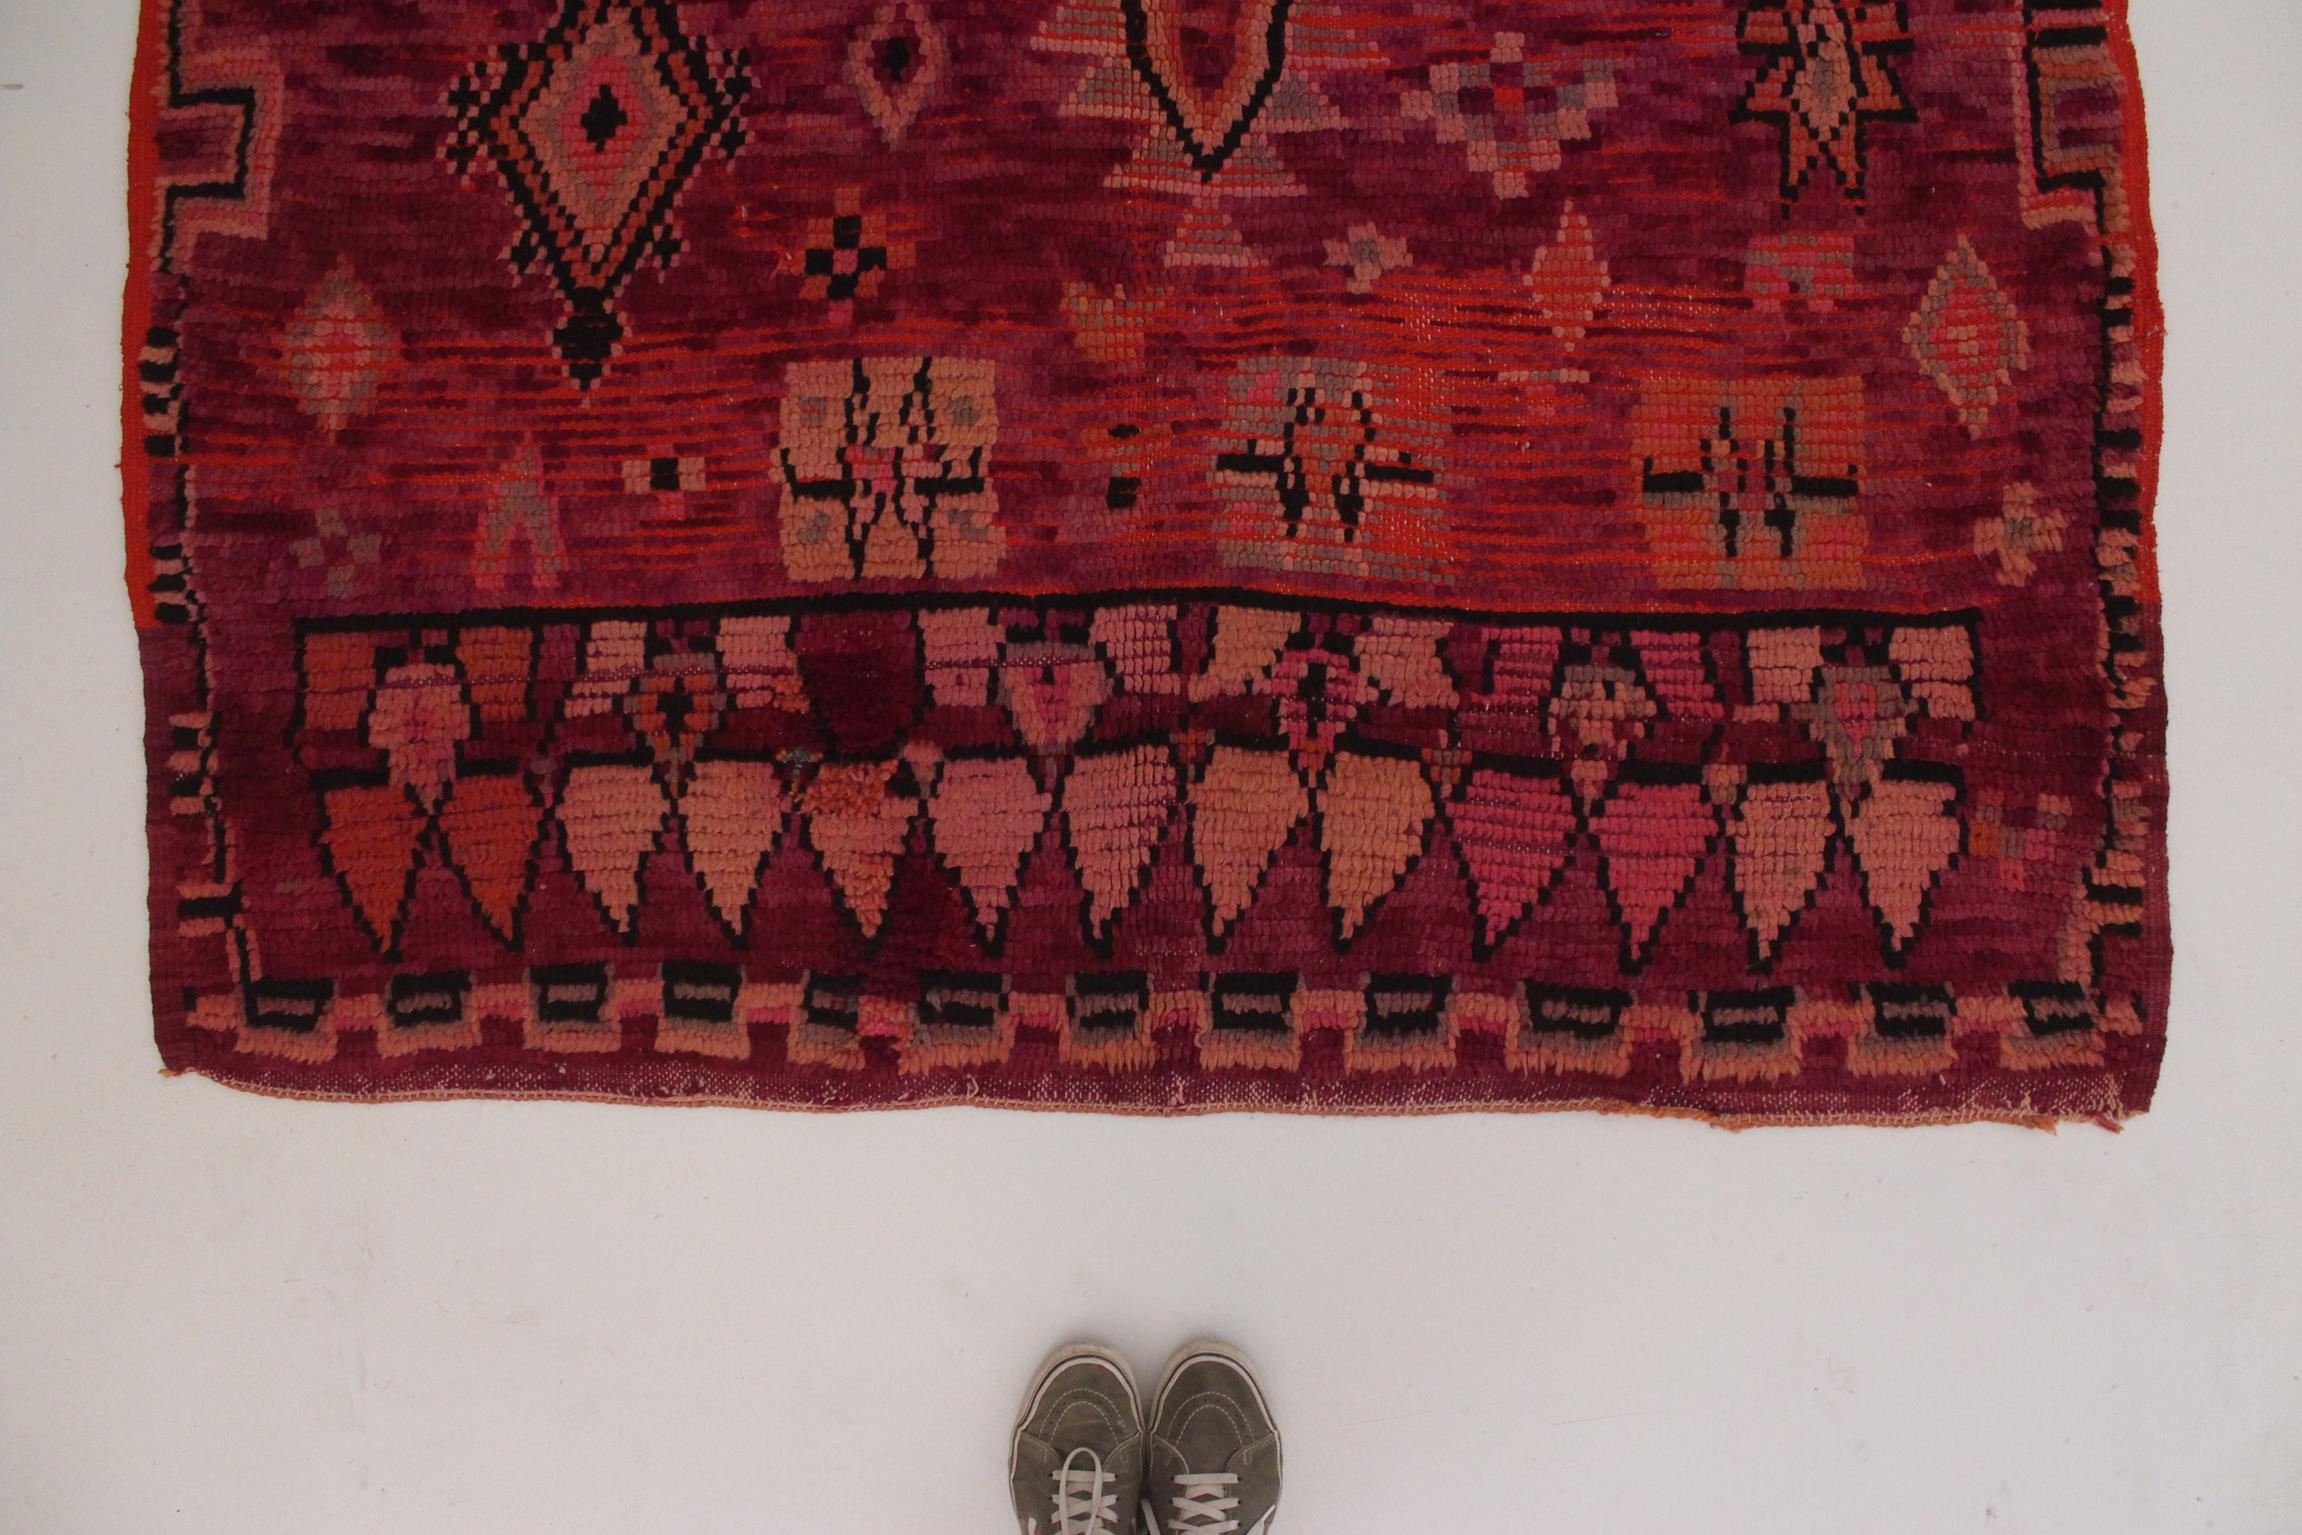 Vintage Moroccan Boujad rug - Red/purple - 5.3x8.1feet / 162x247cm For Sale 1